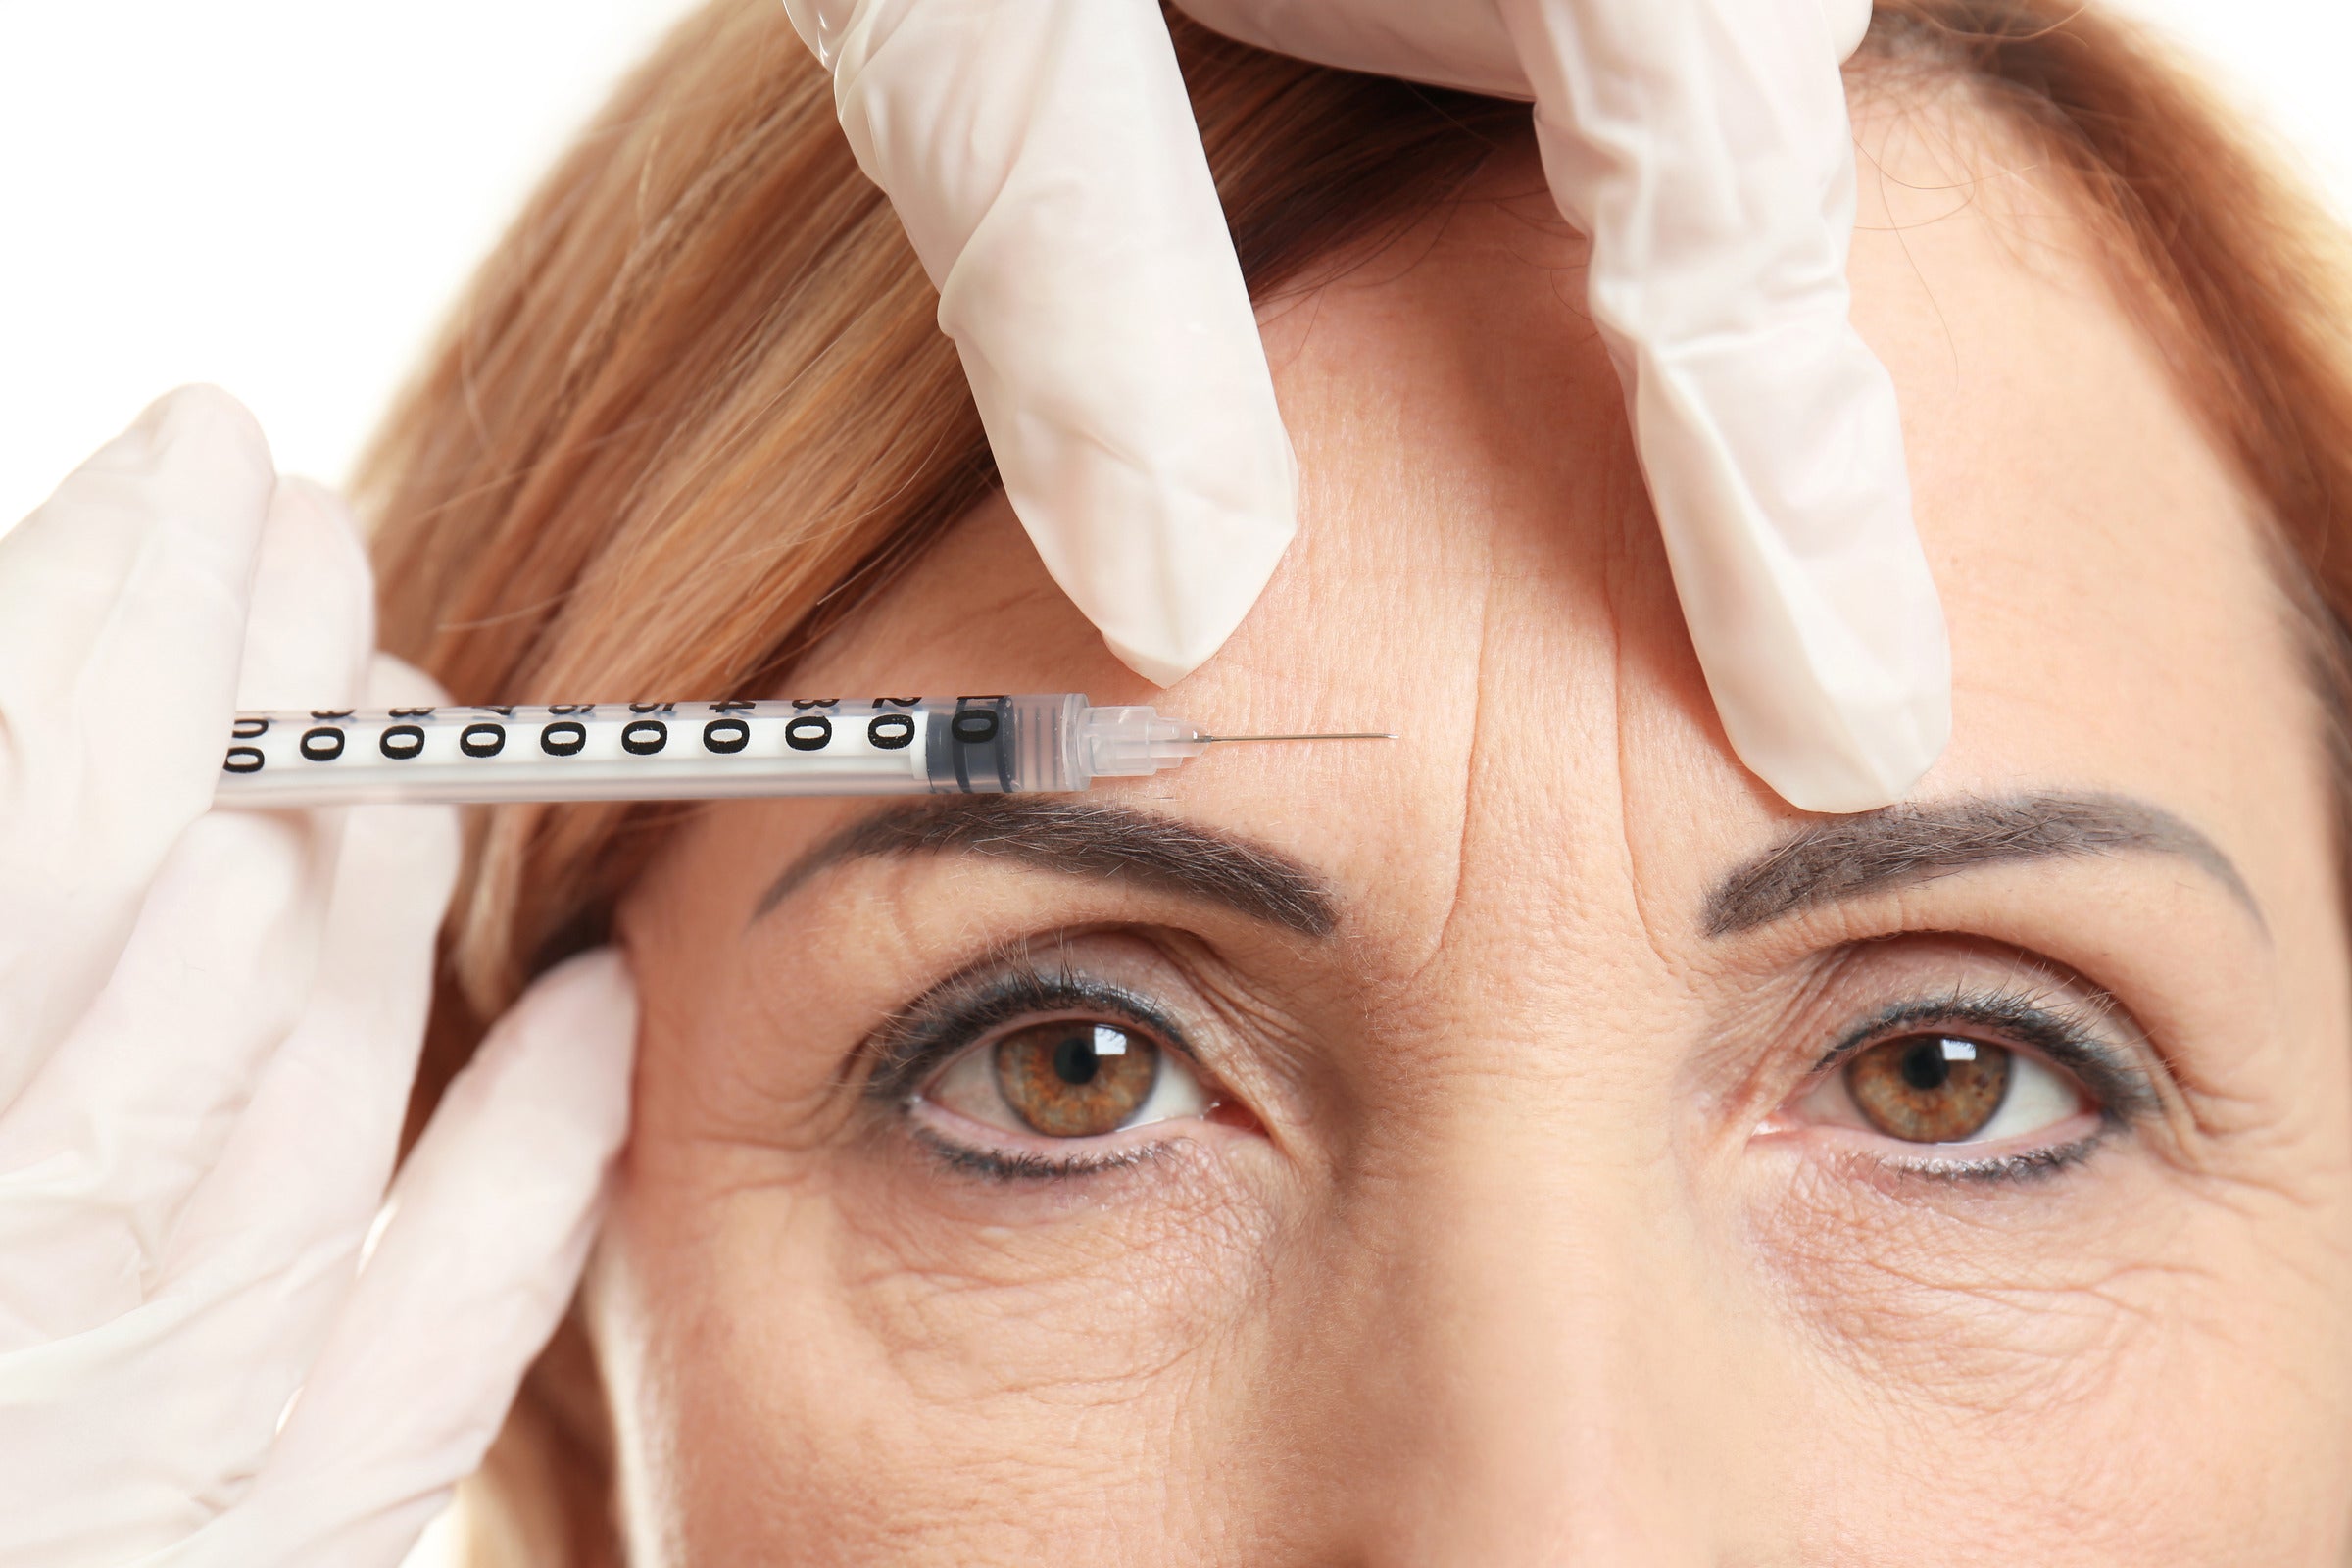 Botox lasts as long as the patient's forehead ages